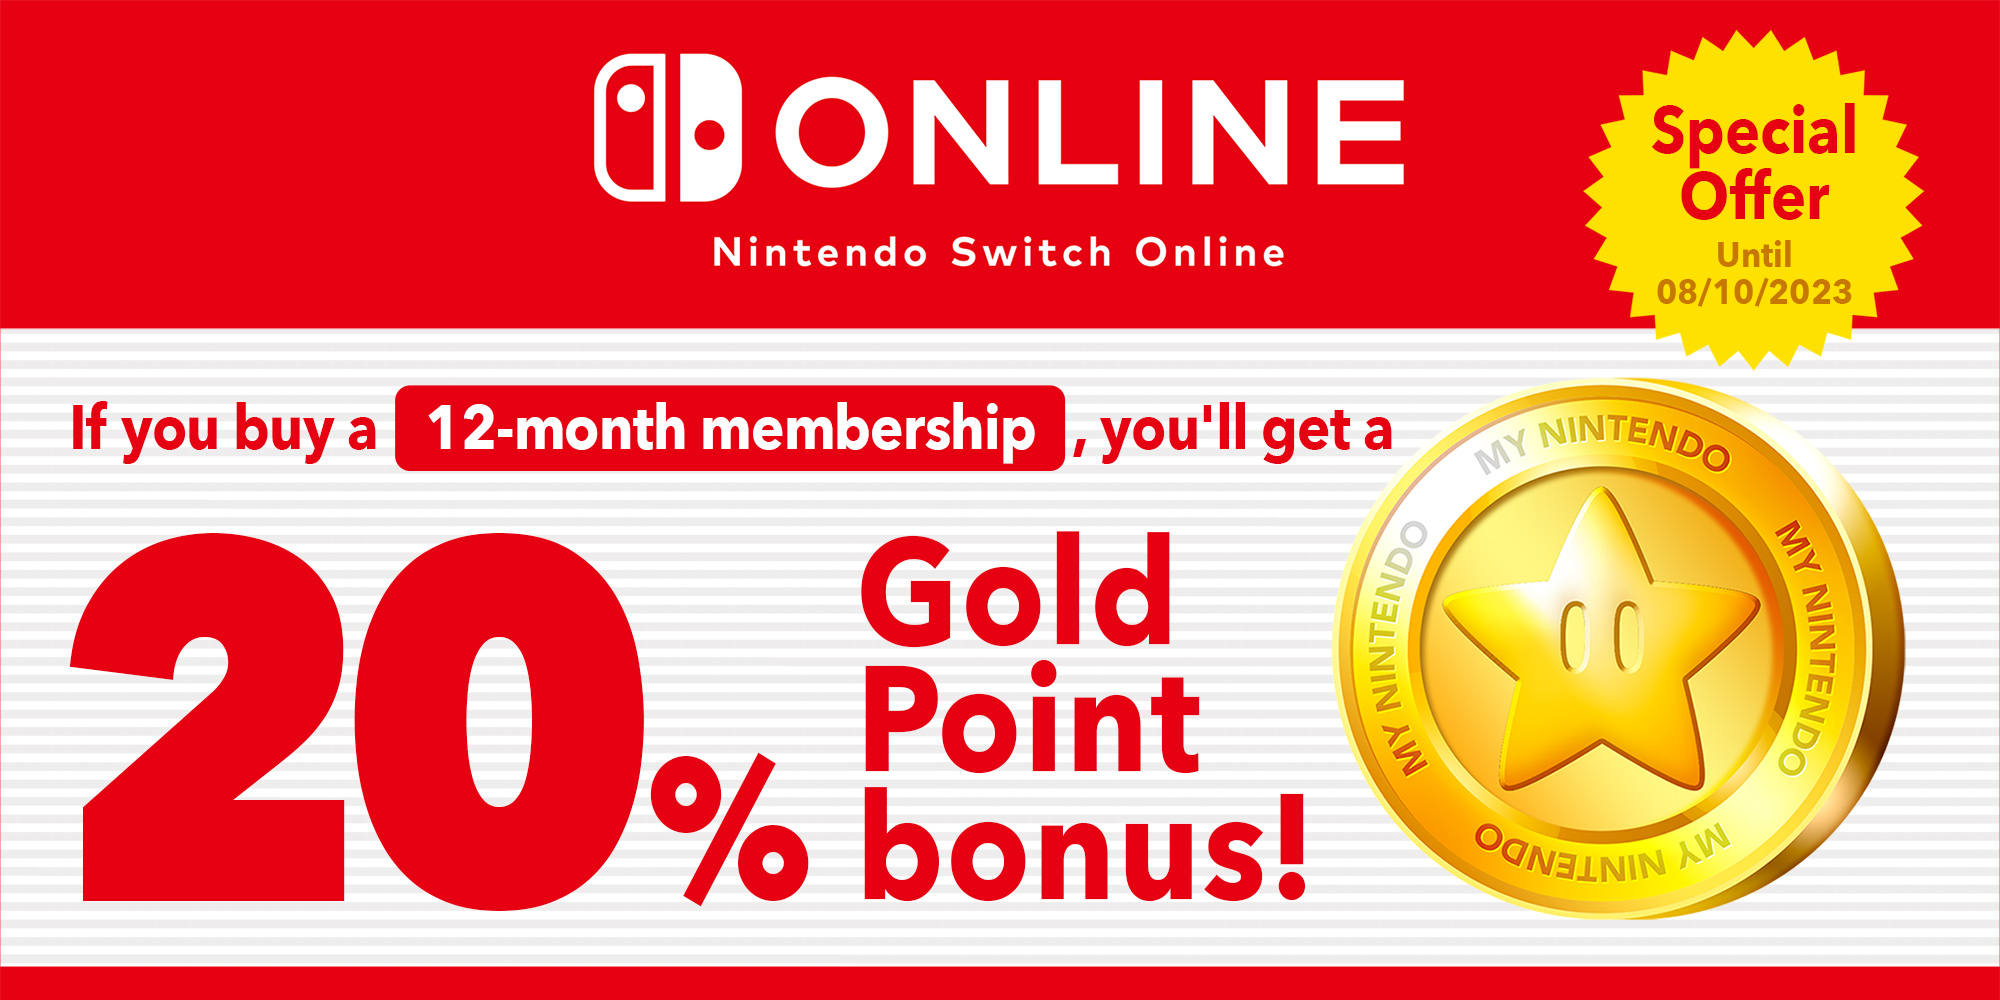 Special offer: You can earn up to R226.00 in Gold Points with 12-month Nintendo Switch Online memberships!